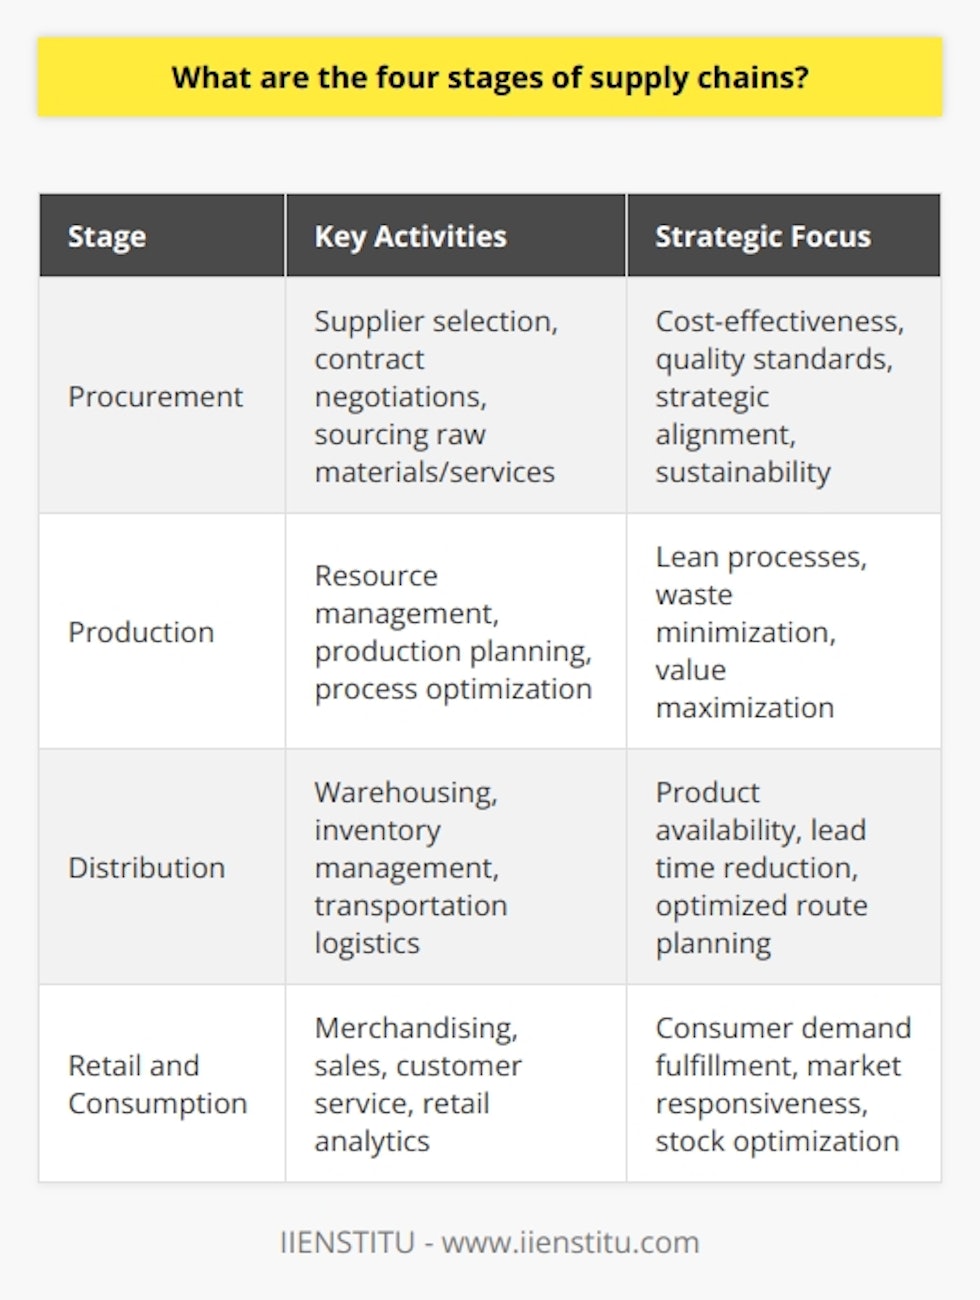 The supply chain is a critical system that drives the flow of goods and services from their point of inception to the end consumer. Effective management of each stage within the supply chain ensures operational excellence and competitive advantage. Herein lies a detailed outline of the four pivotal stages that constitute the backbone of a comprehensive supply chain.1. Procurement: The bedrock of the supply chain, procurement is the strategic process of sourcing and acquiring the necessary raw materials or services needed for production. In this stage, businesses engage in selecting suppliers, establishing payment terms, and negotiating contracts. A detailed understanding of market trends and supplier capabilities is key to ensuring that procurement is cost-effective, that materials meet quality standards, and that the process aligns with the overall strategic goals of the organization. Sustainable procurement further entails a consideration for the environmental and social impact of sourcing decisions.2. Production: This stage is where the actual creation of products or services takes place. Commonly referred to as manufacturing, production can range from simple assembly to complex multi-stage processes. It involves managing resources such as labor, capital equipment, and technology to turn inputs into finished goods efficiently. Achieving a lean production process minimizes waste and maximizes value creation. Production planning and control systems are crucial here to balance demand forecasts with production capacity, inventory levels, and the scheduling of workloads.3. Distribution: Efficient distribution is essential to ensure that products are available to customers when and where needed. This stage covers all activities that facilitate the movement of finished goods from manufacturing facilities to the end user. Critical elements of the distribution stage are warehousing for storage, inventory management to track stock levels, and logistics for transporting goods across the supply chain network. Innovative distribution models and advanced logistics solutions aid in reducing lead times, optimizing route planning, and improving overall customer satisfaction with delivery services.4. Retail and Consumption: The final stage of the supply chain involves making the product available to the consumer. Retail can take place in various settings such as physical stores, online platforms, or via direct sales. The efficient operation of this stage is crucial since it is where the value proposition is delivered to the consumer. It involves merchandising, sales, and customer service activities. Understanding and responding to consumer behaviors, preferences, and feedback is essential to ensure products are available in the right place, at the right time, and in the right quantities. Retail analytics help in optimizing stock levels and product assortments to meet market demands.Effective supply chain management encompasses the seamless integration of these four stages, resulting in a streamlined flow of goods and services that meets or exceeds customer expectations. Digital technologies can greatly enhance visibility and coordination across these stages, leading to more responsive and agile supply chains. By focusing on each stage's unique demands and utilizing strategic planning and innovation, organizations can deliver superior value to customers and maintain a competitive edge in the marketplace.